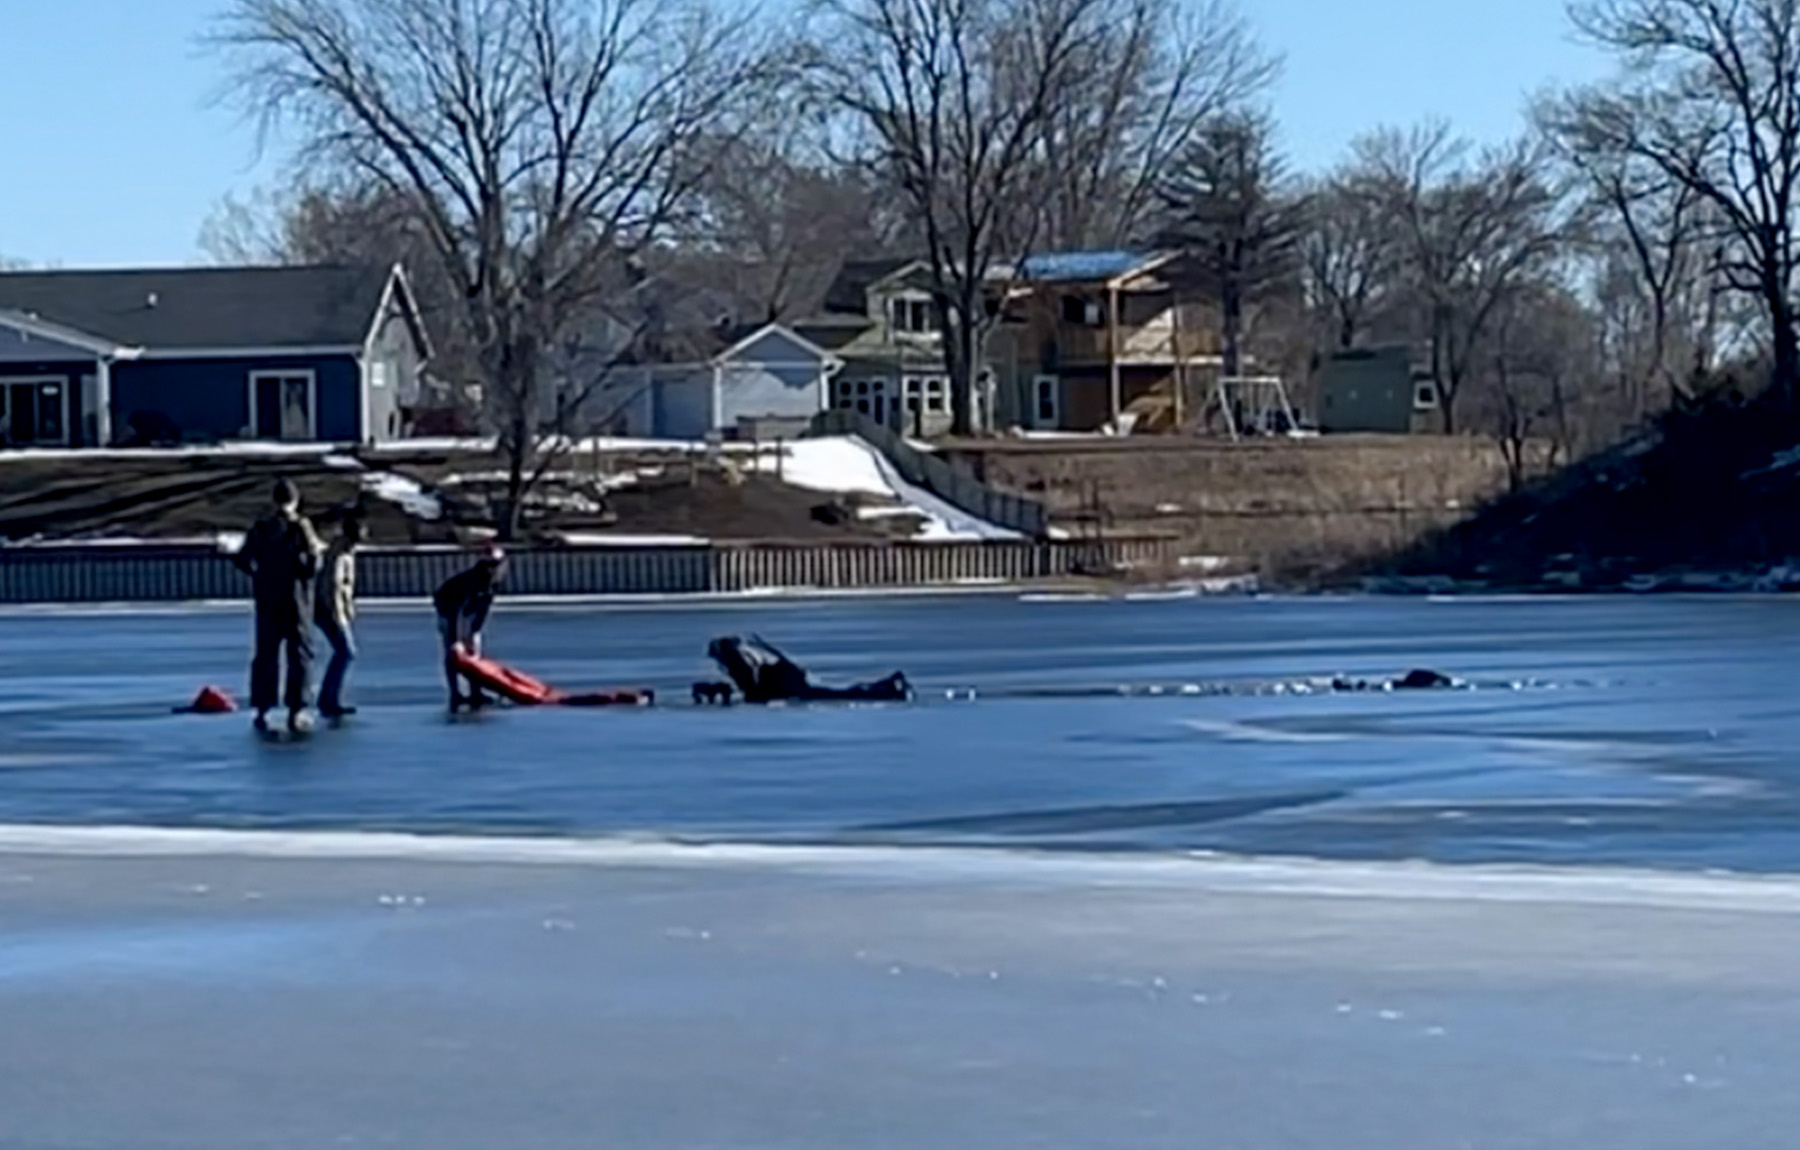 A group of ice fishermen rescue an angler who fell through the ice.